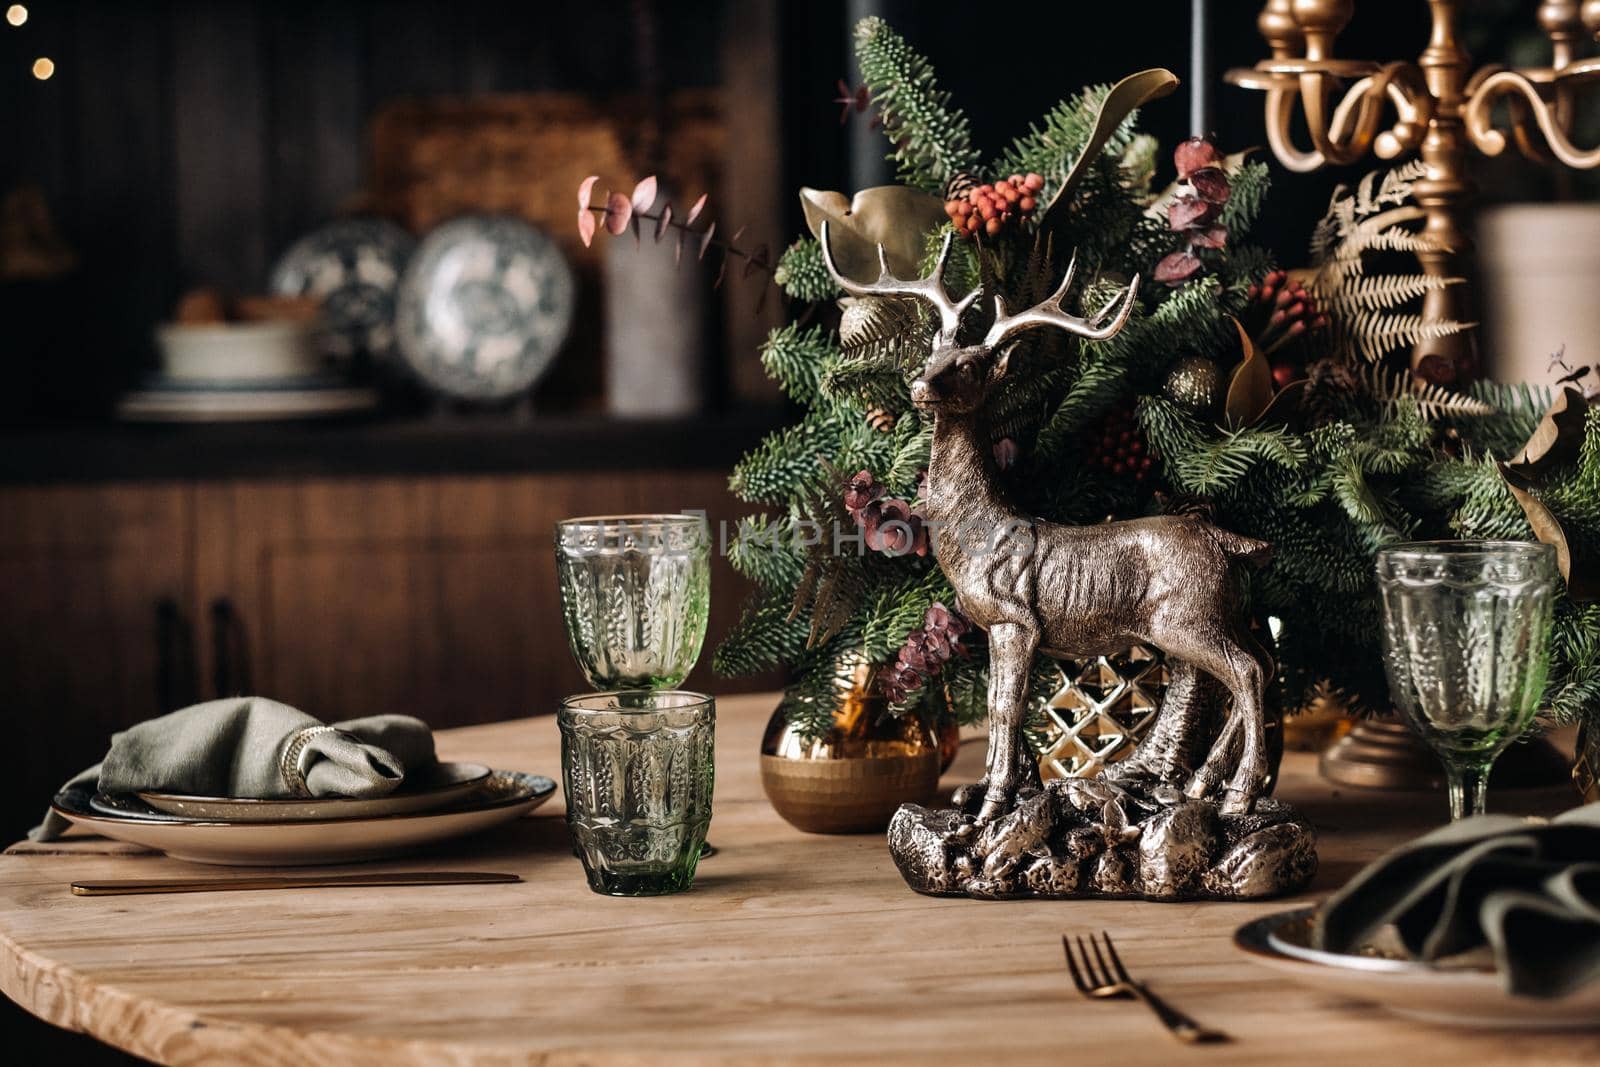 Christmas table decoration, Banquet table with glasses before serving food, Close-up of Christmas dinner table with seasonal decorations, crystal glasses and decorative deer by Lobachad